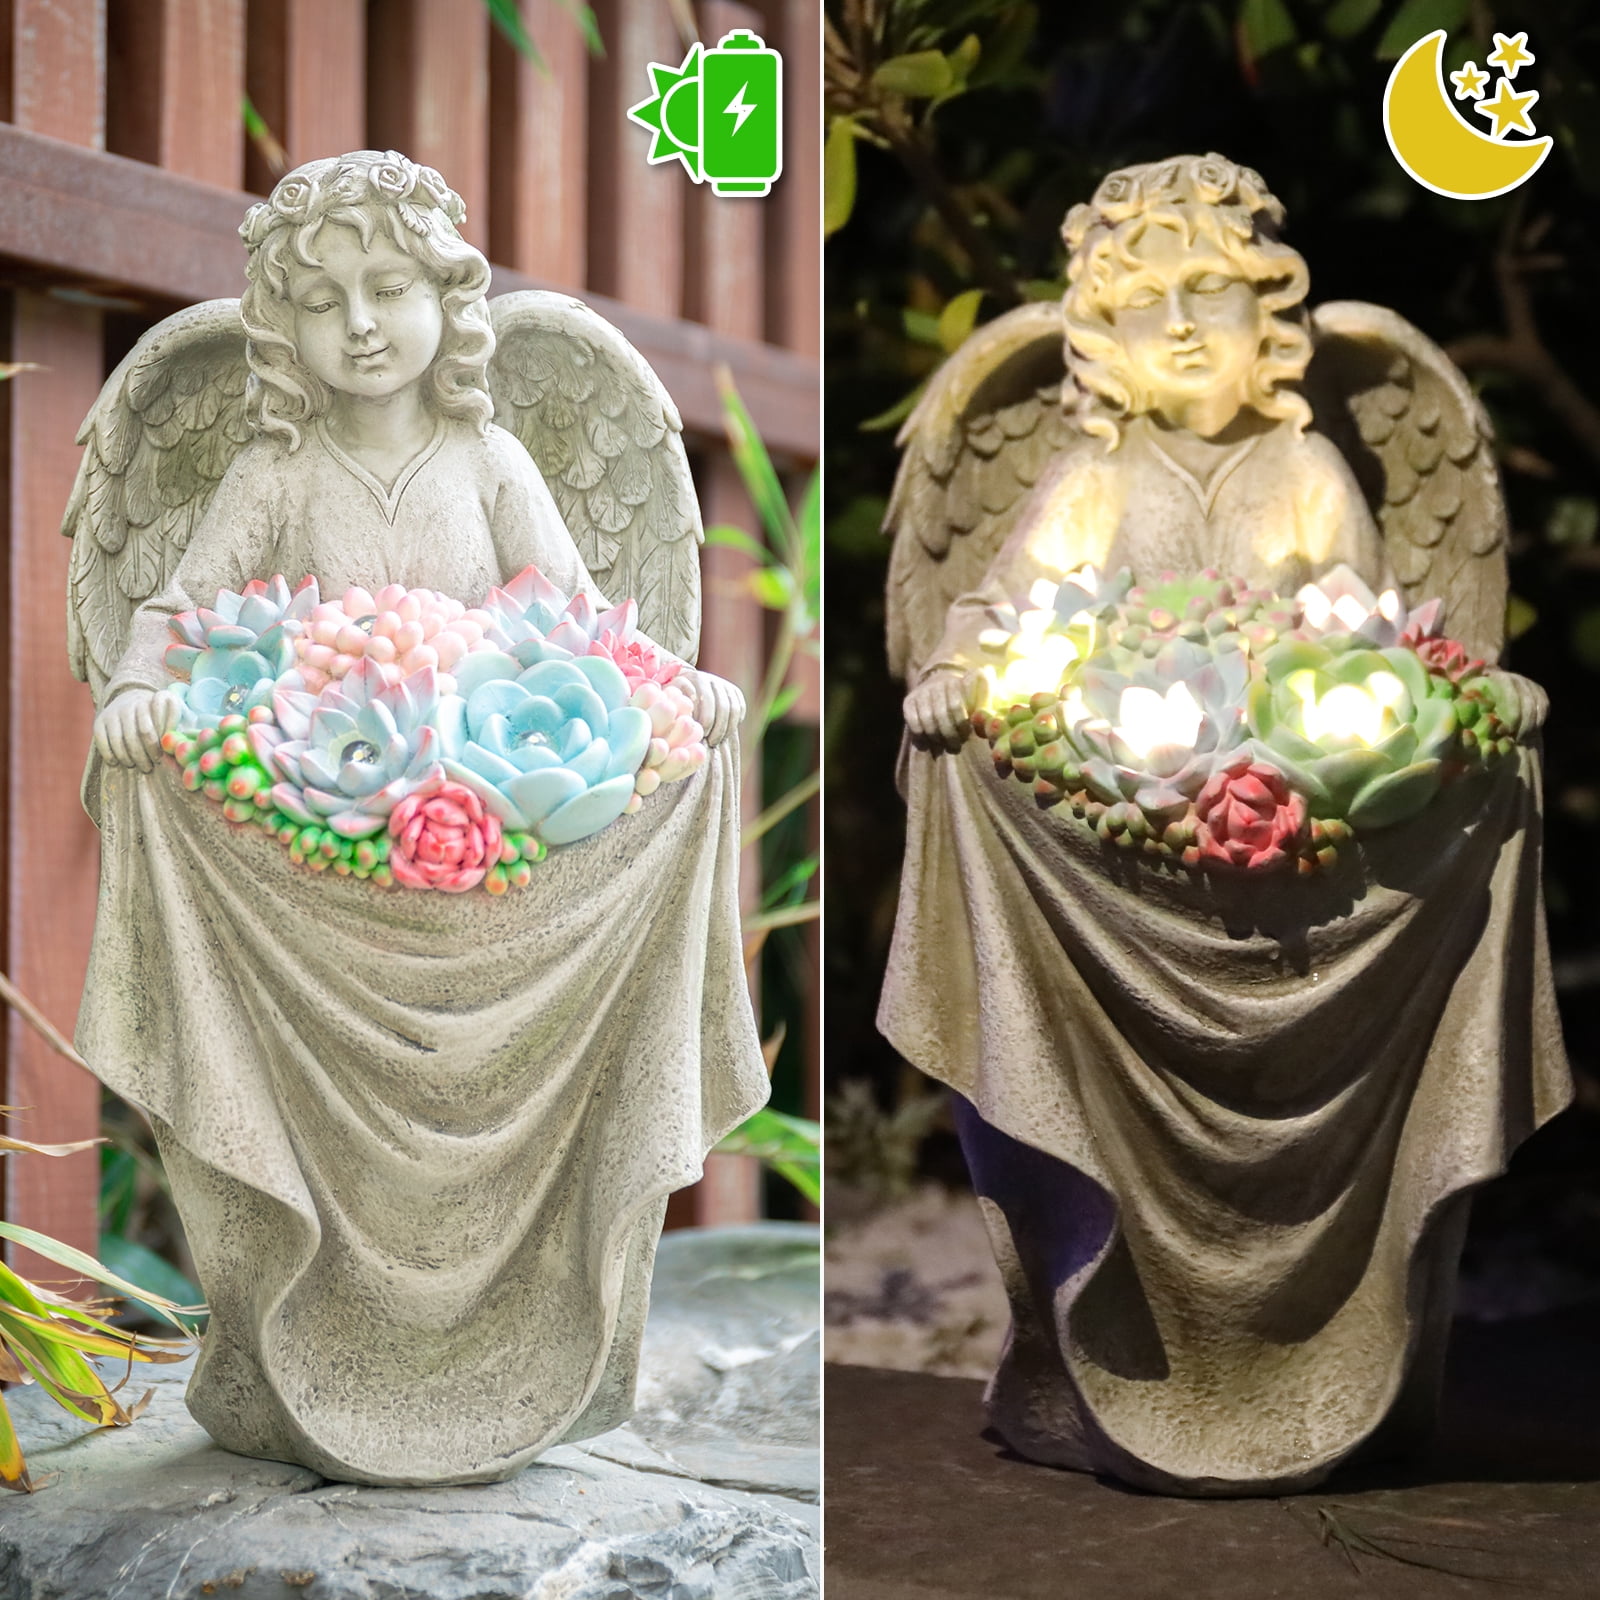 Goodeco Angel Solar Outdoor Garden Decor Statues Yard Art Patio Front Lawn  Ornaments Christmas Gifts for Mom Grandma Women LD602229 - The Home Depot